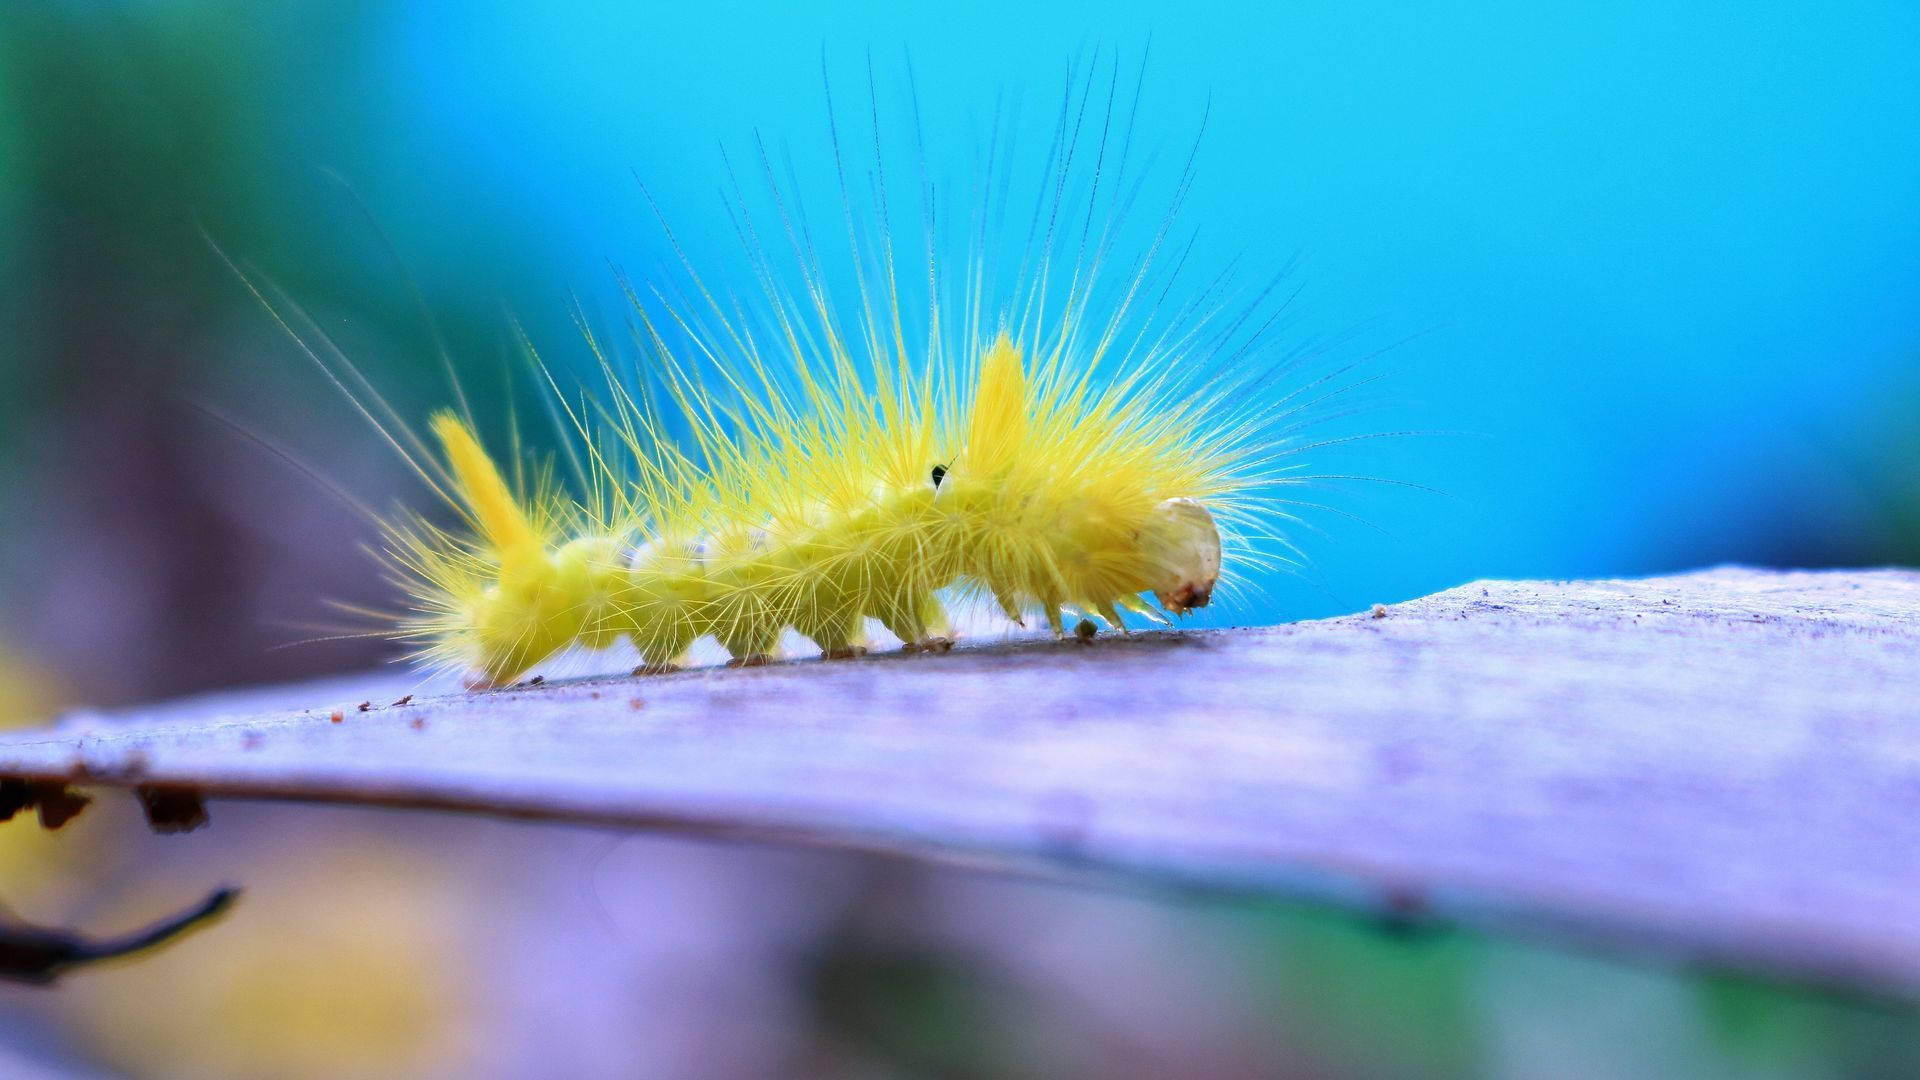 Long-haired Yellow Caterpillar On Leaf